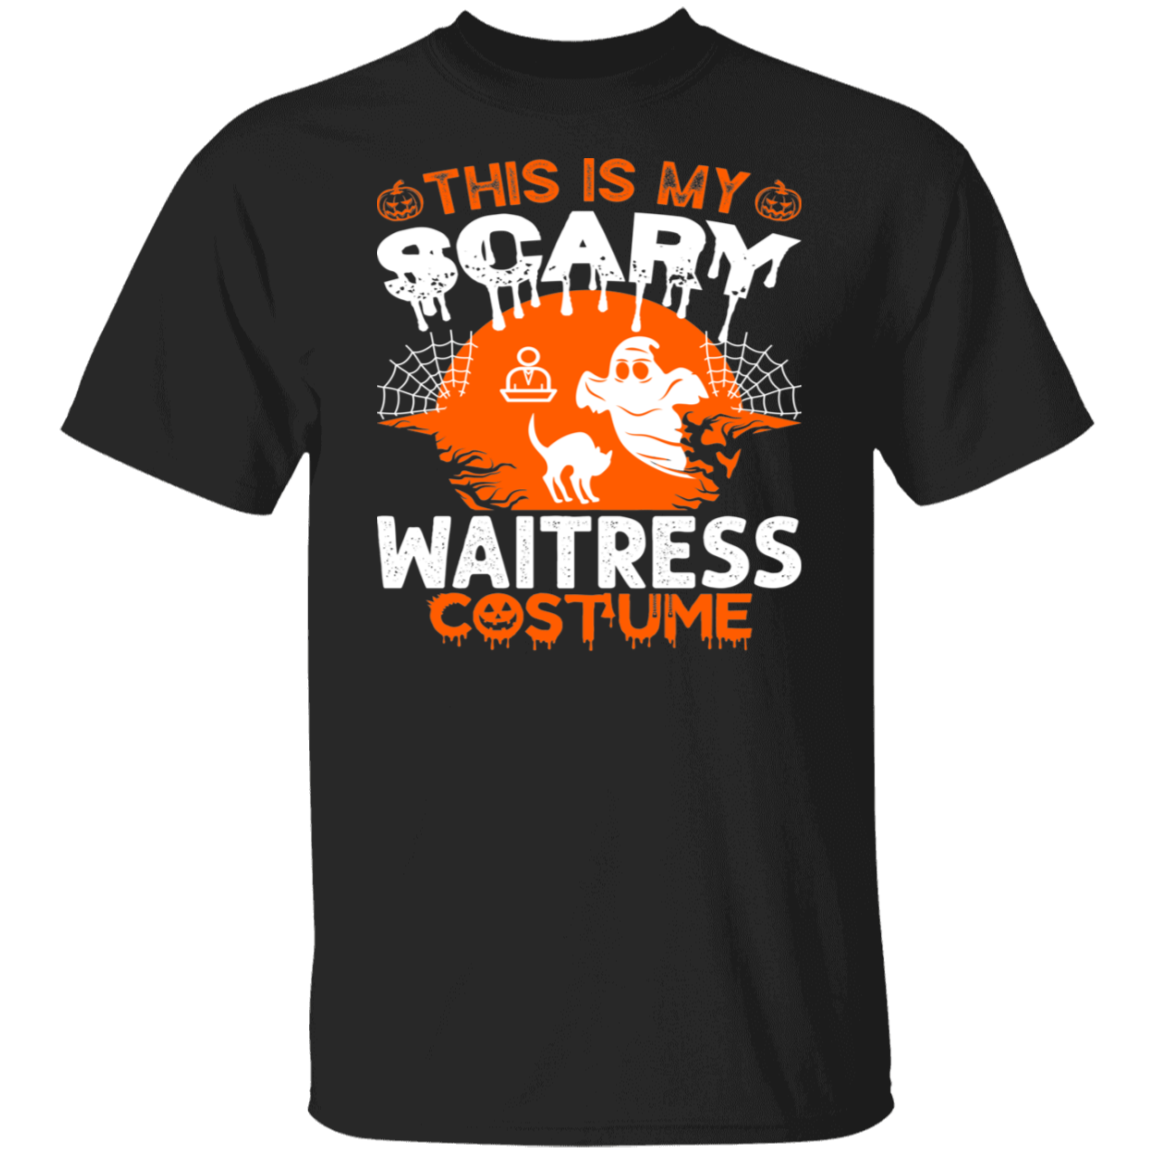 This Is My Scary Waitress Costume T-Shirt